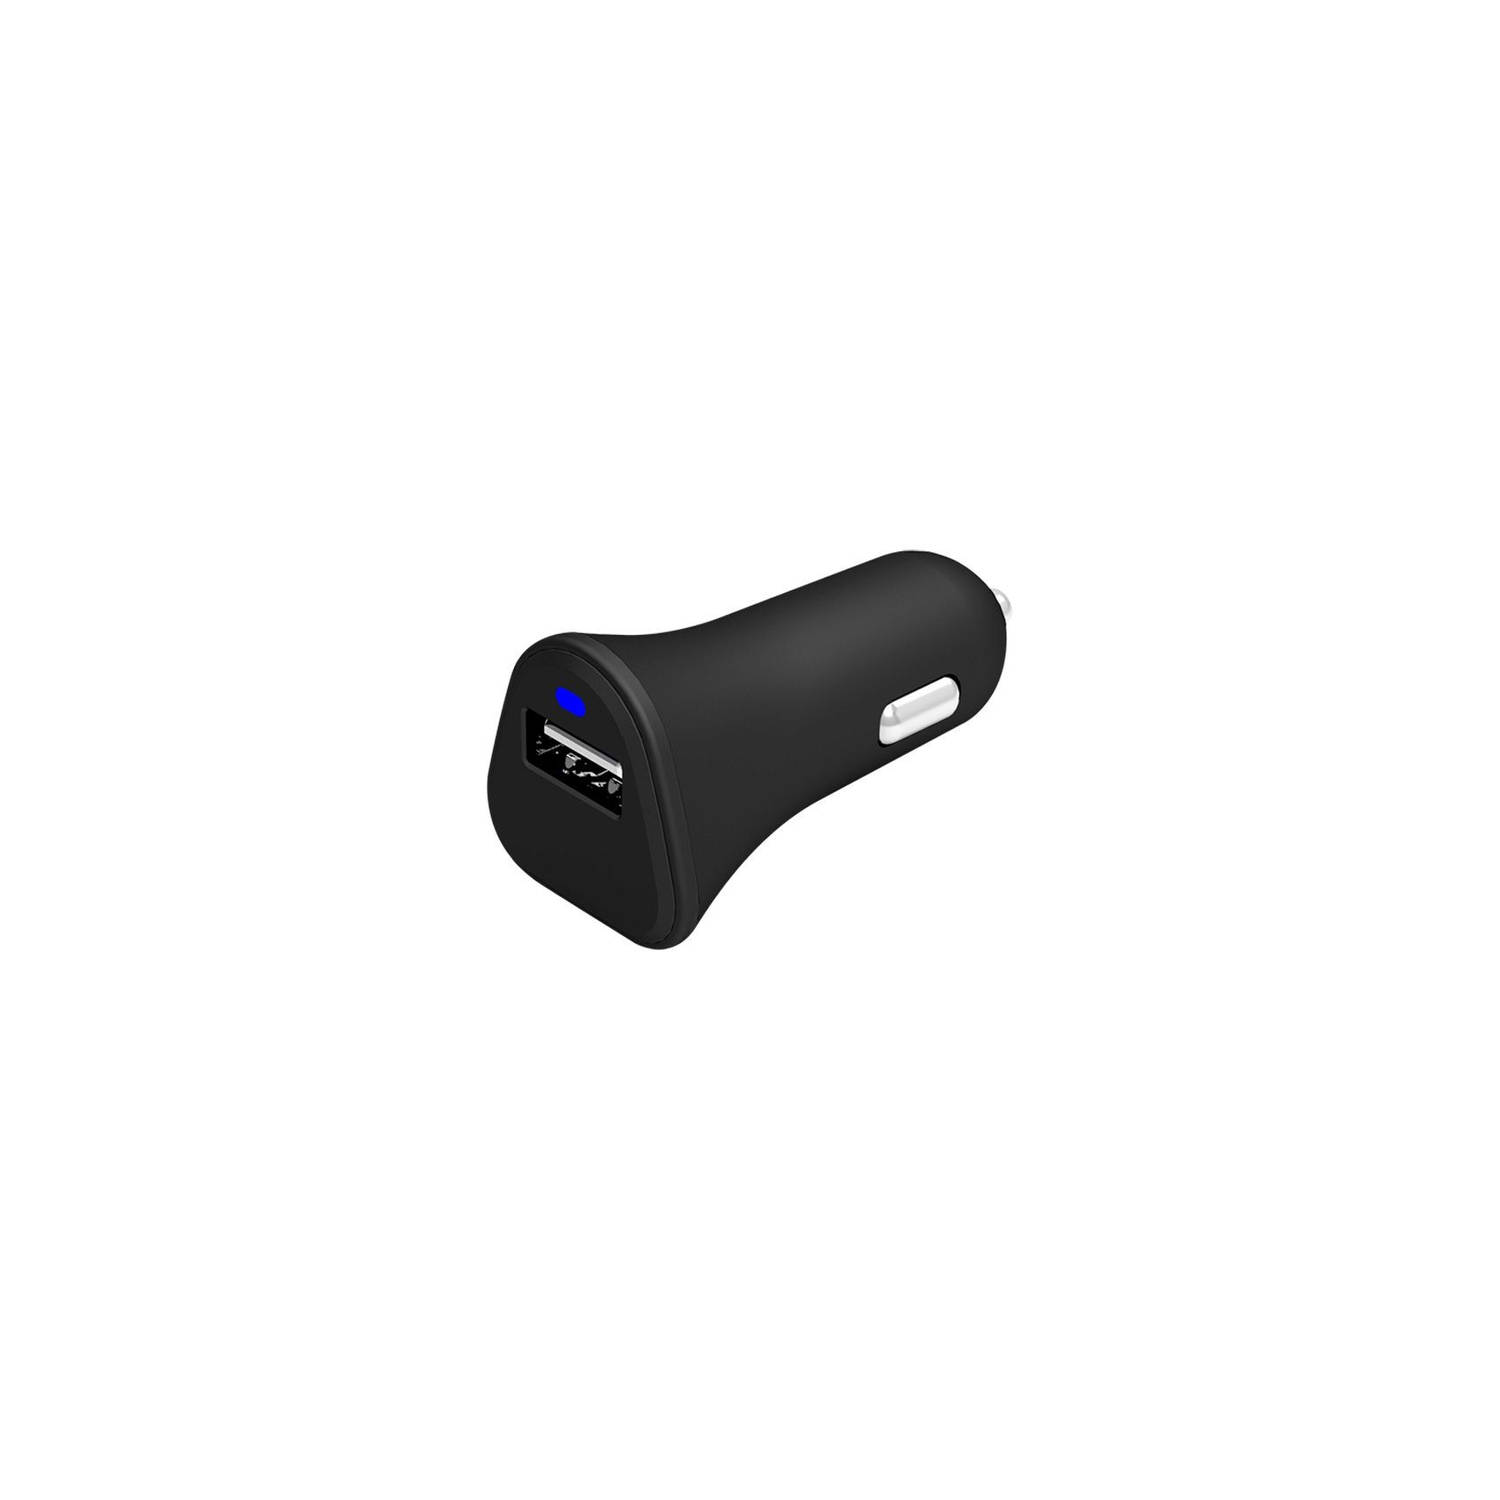 Autolader met 1 USB poort - Celly Procompact